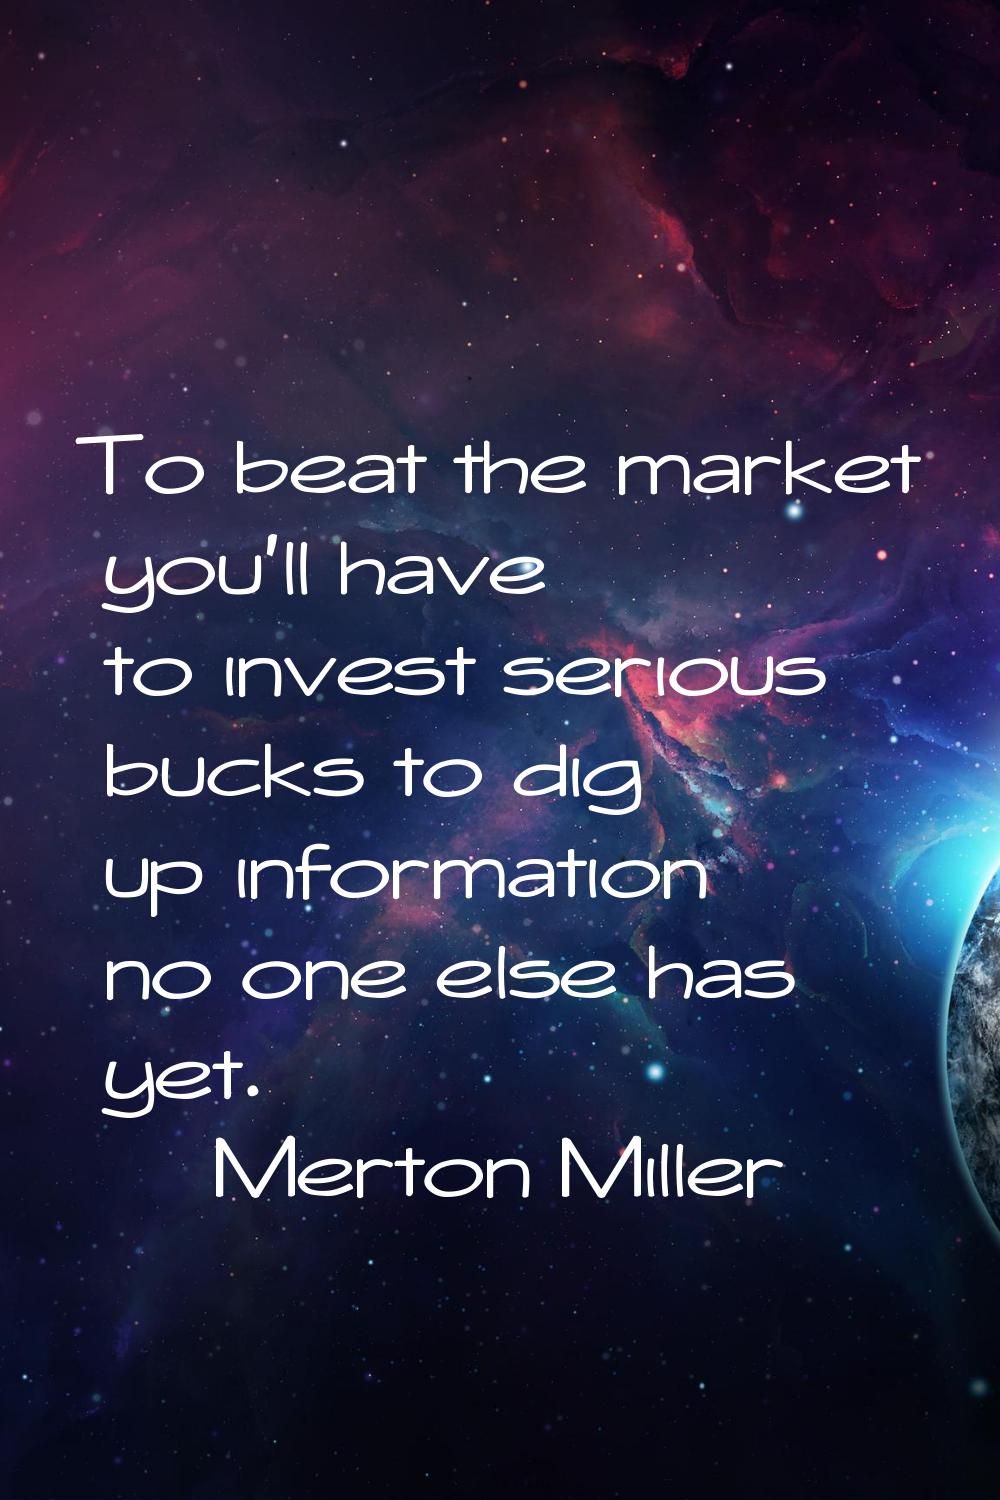 To beat the market you'll have to invest serious bucks to dig up information no one else has yet.